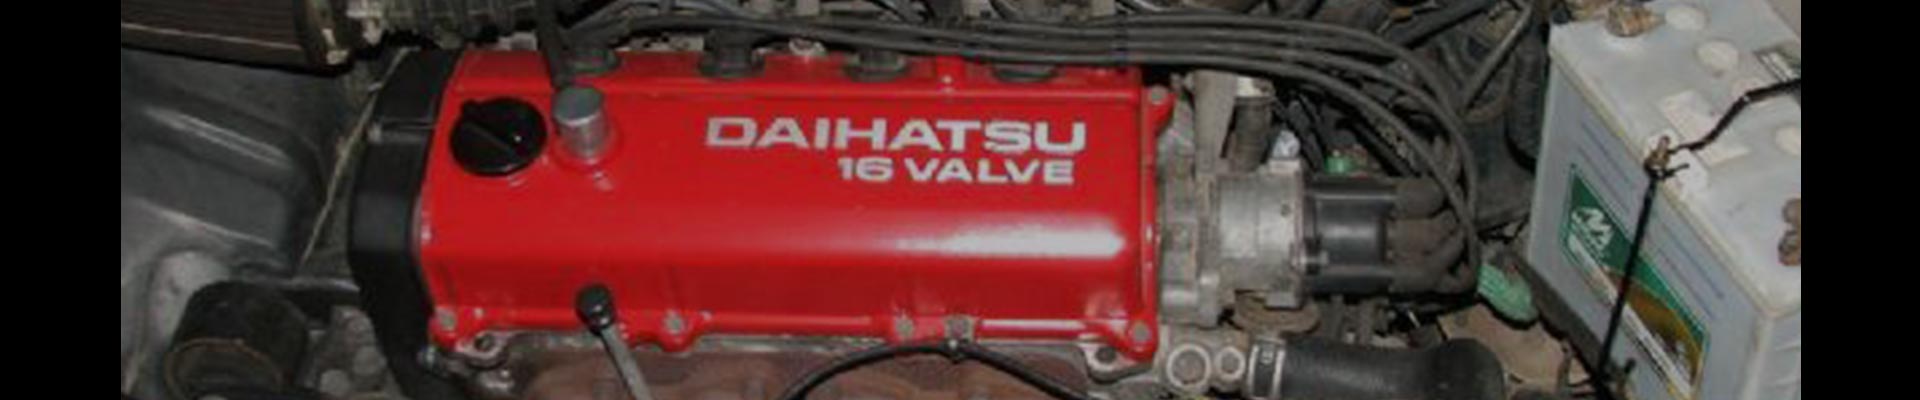 Shop Replacement 1989 Daihatsu Charade Parts with Discounted Price on the Net